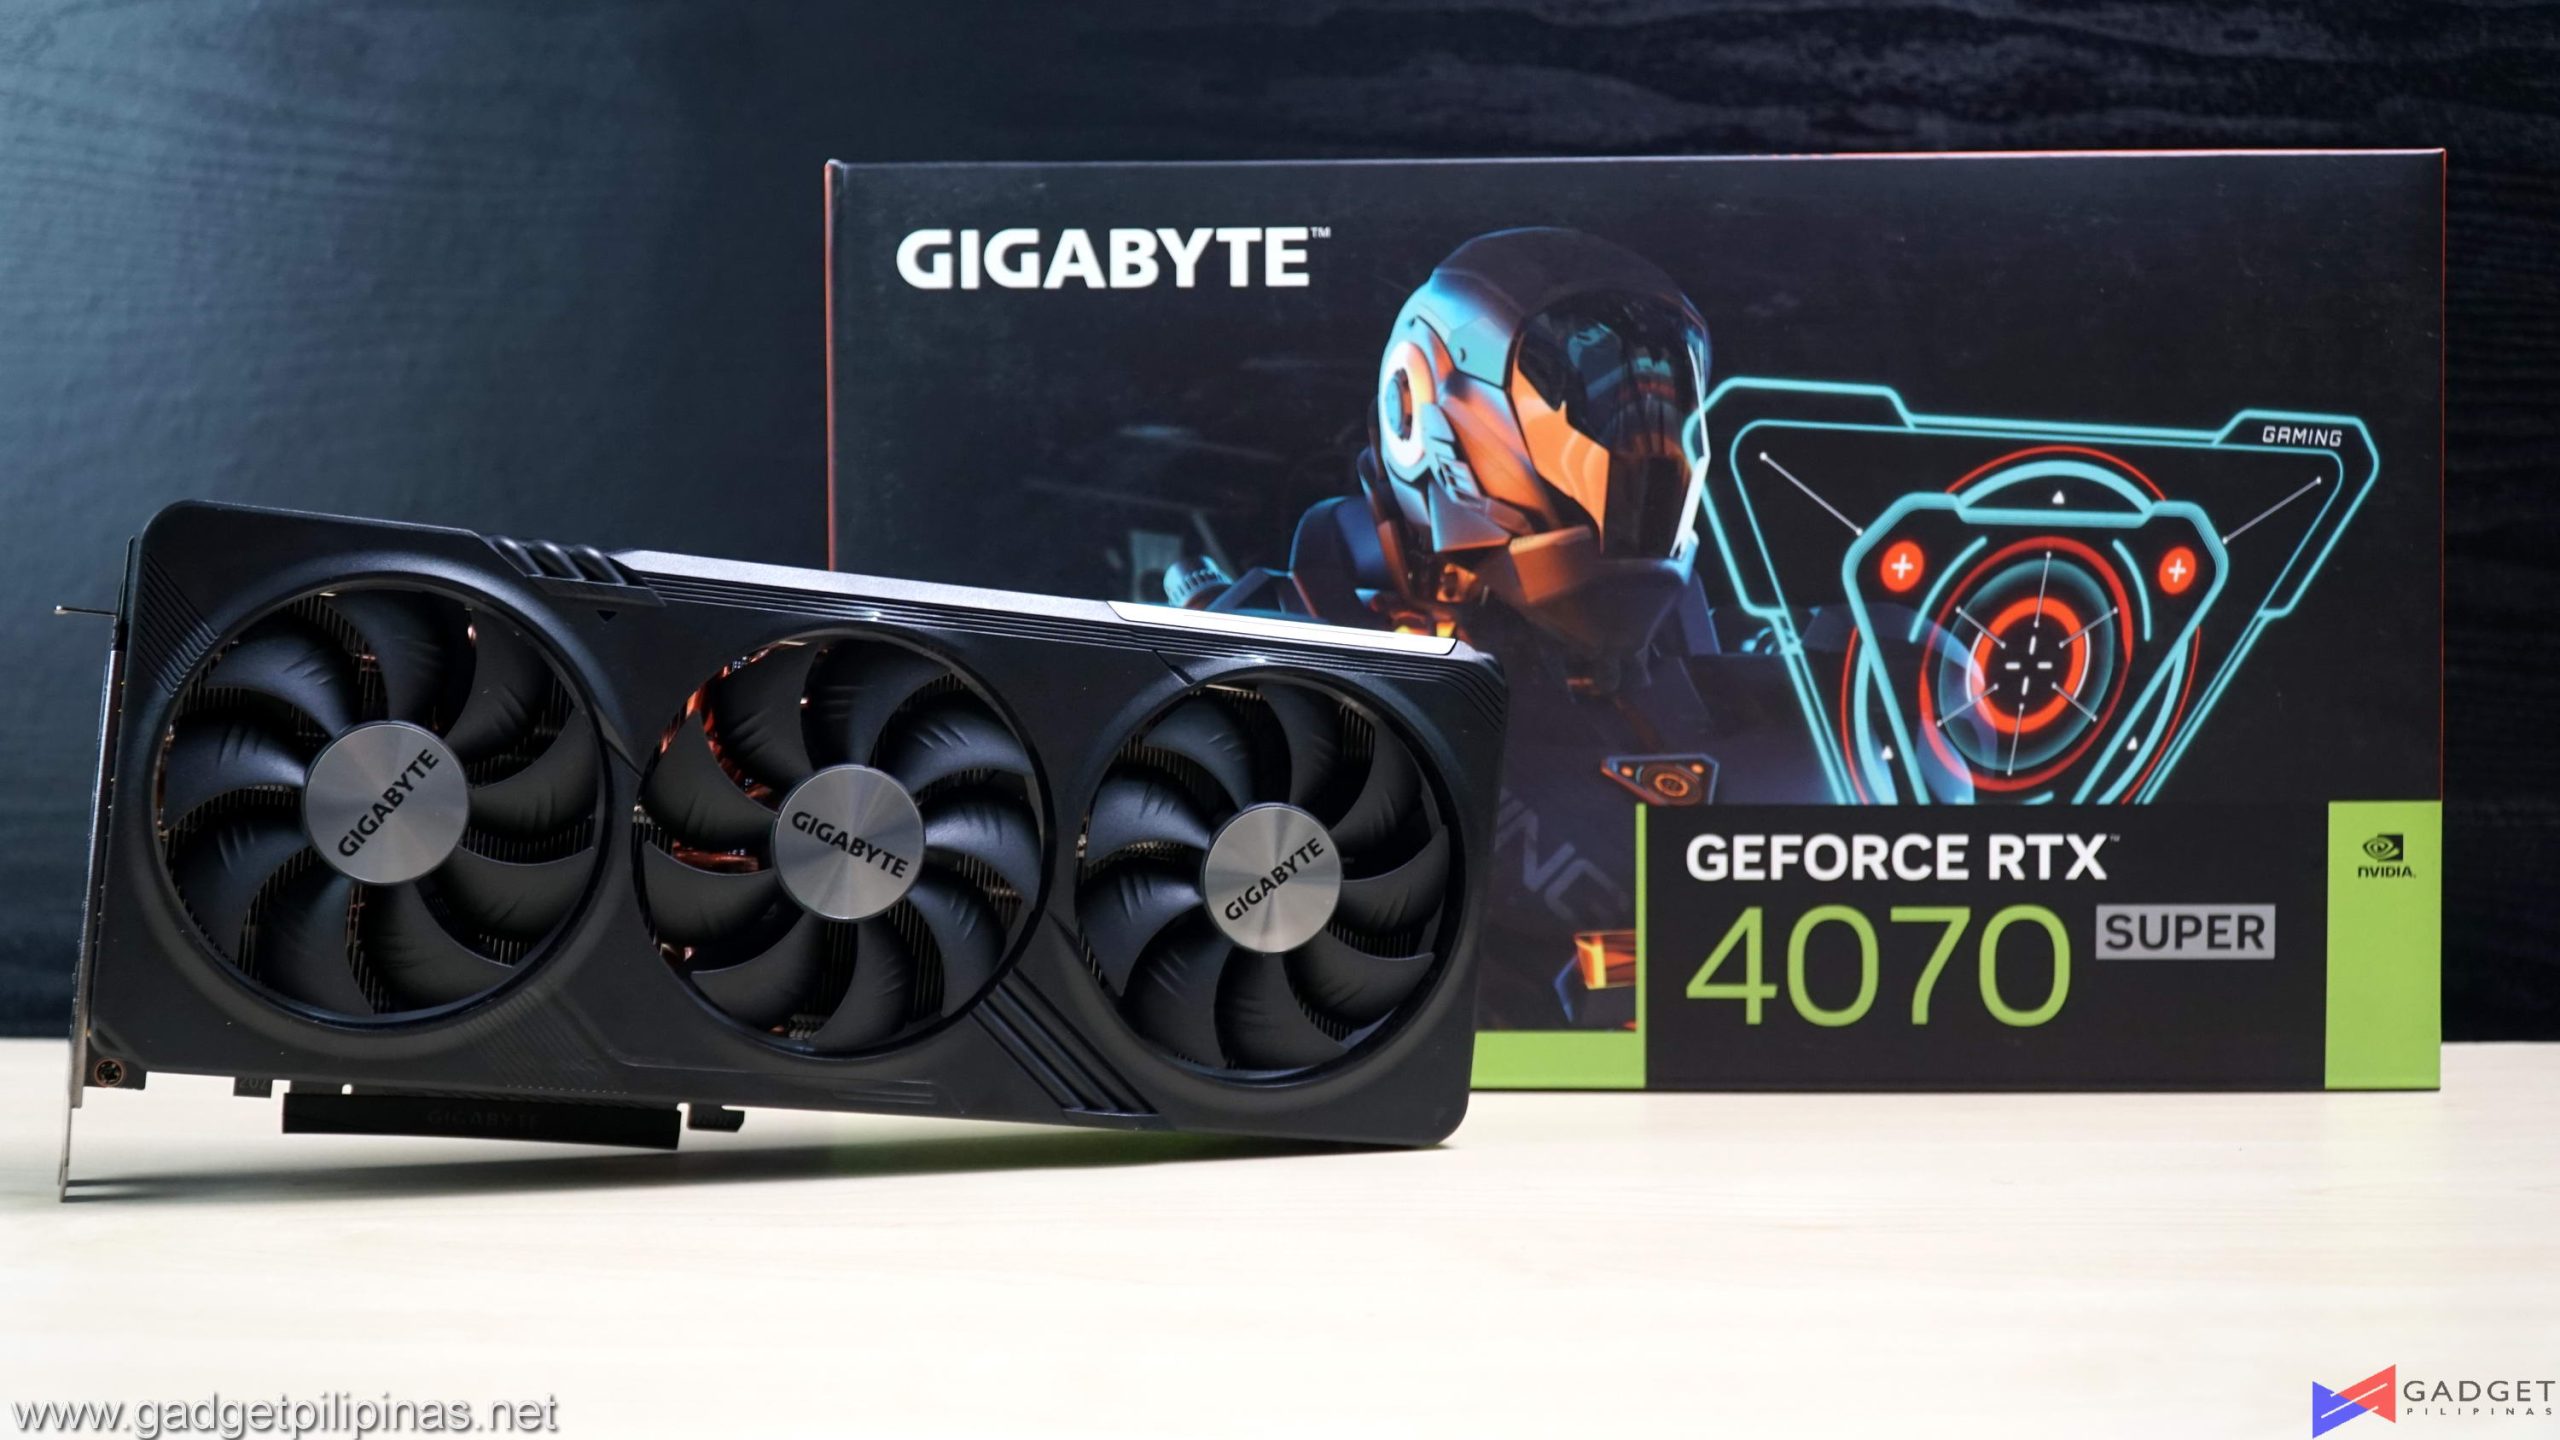 Reviewers begin testing GeForce RTX 4080 SUPER, first benchmarks spotted 